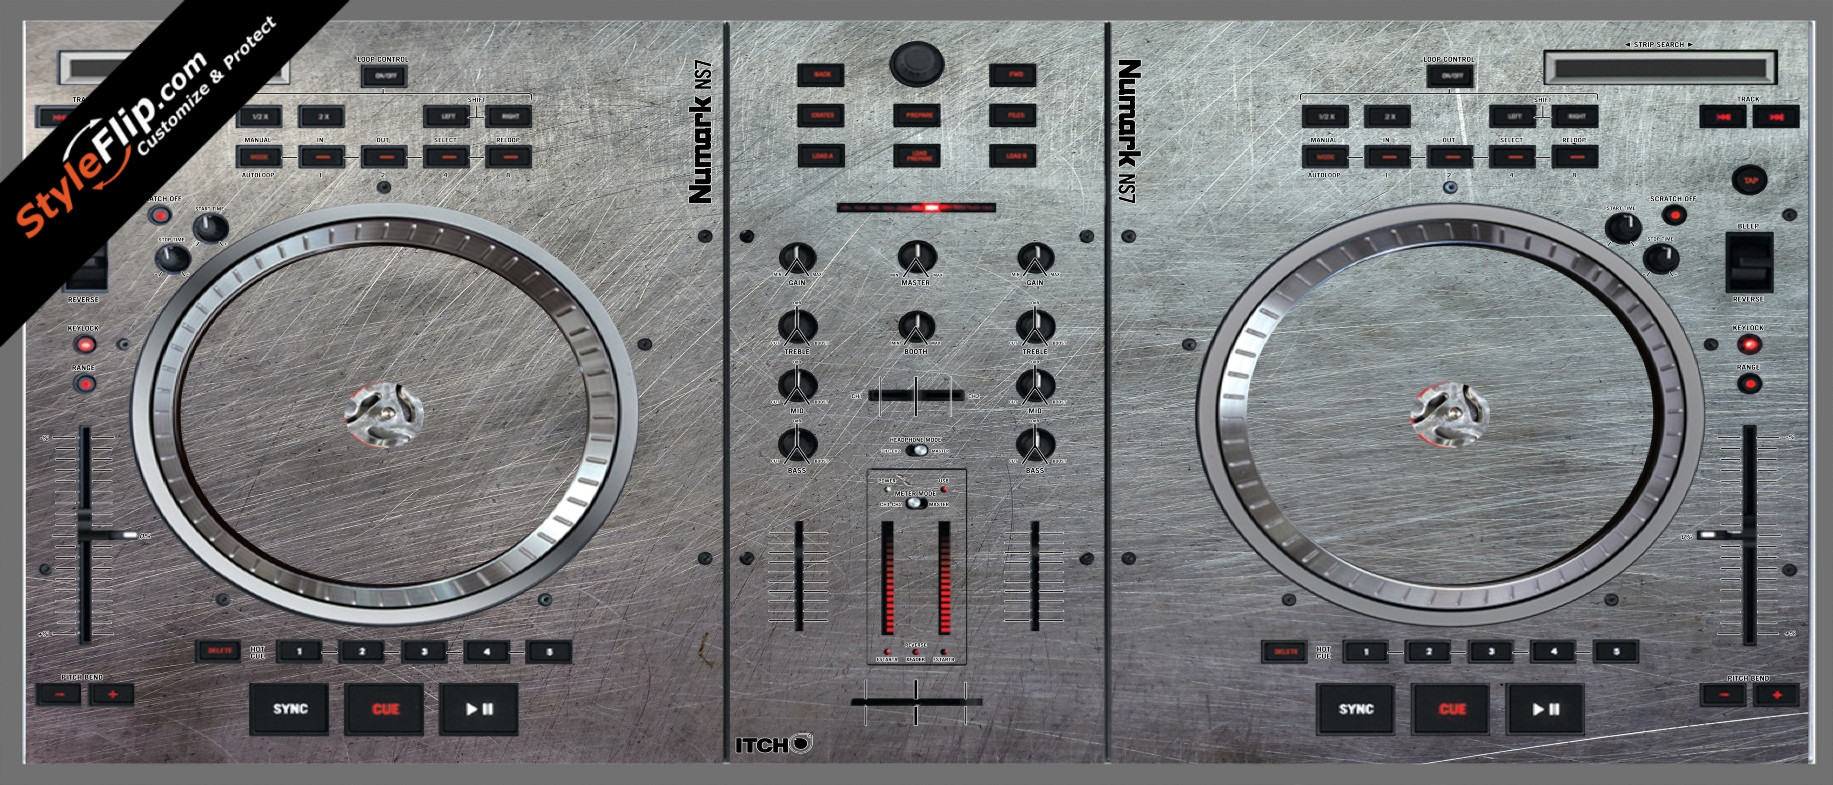 Steel Your Faceplate Numark NS-7